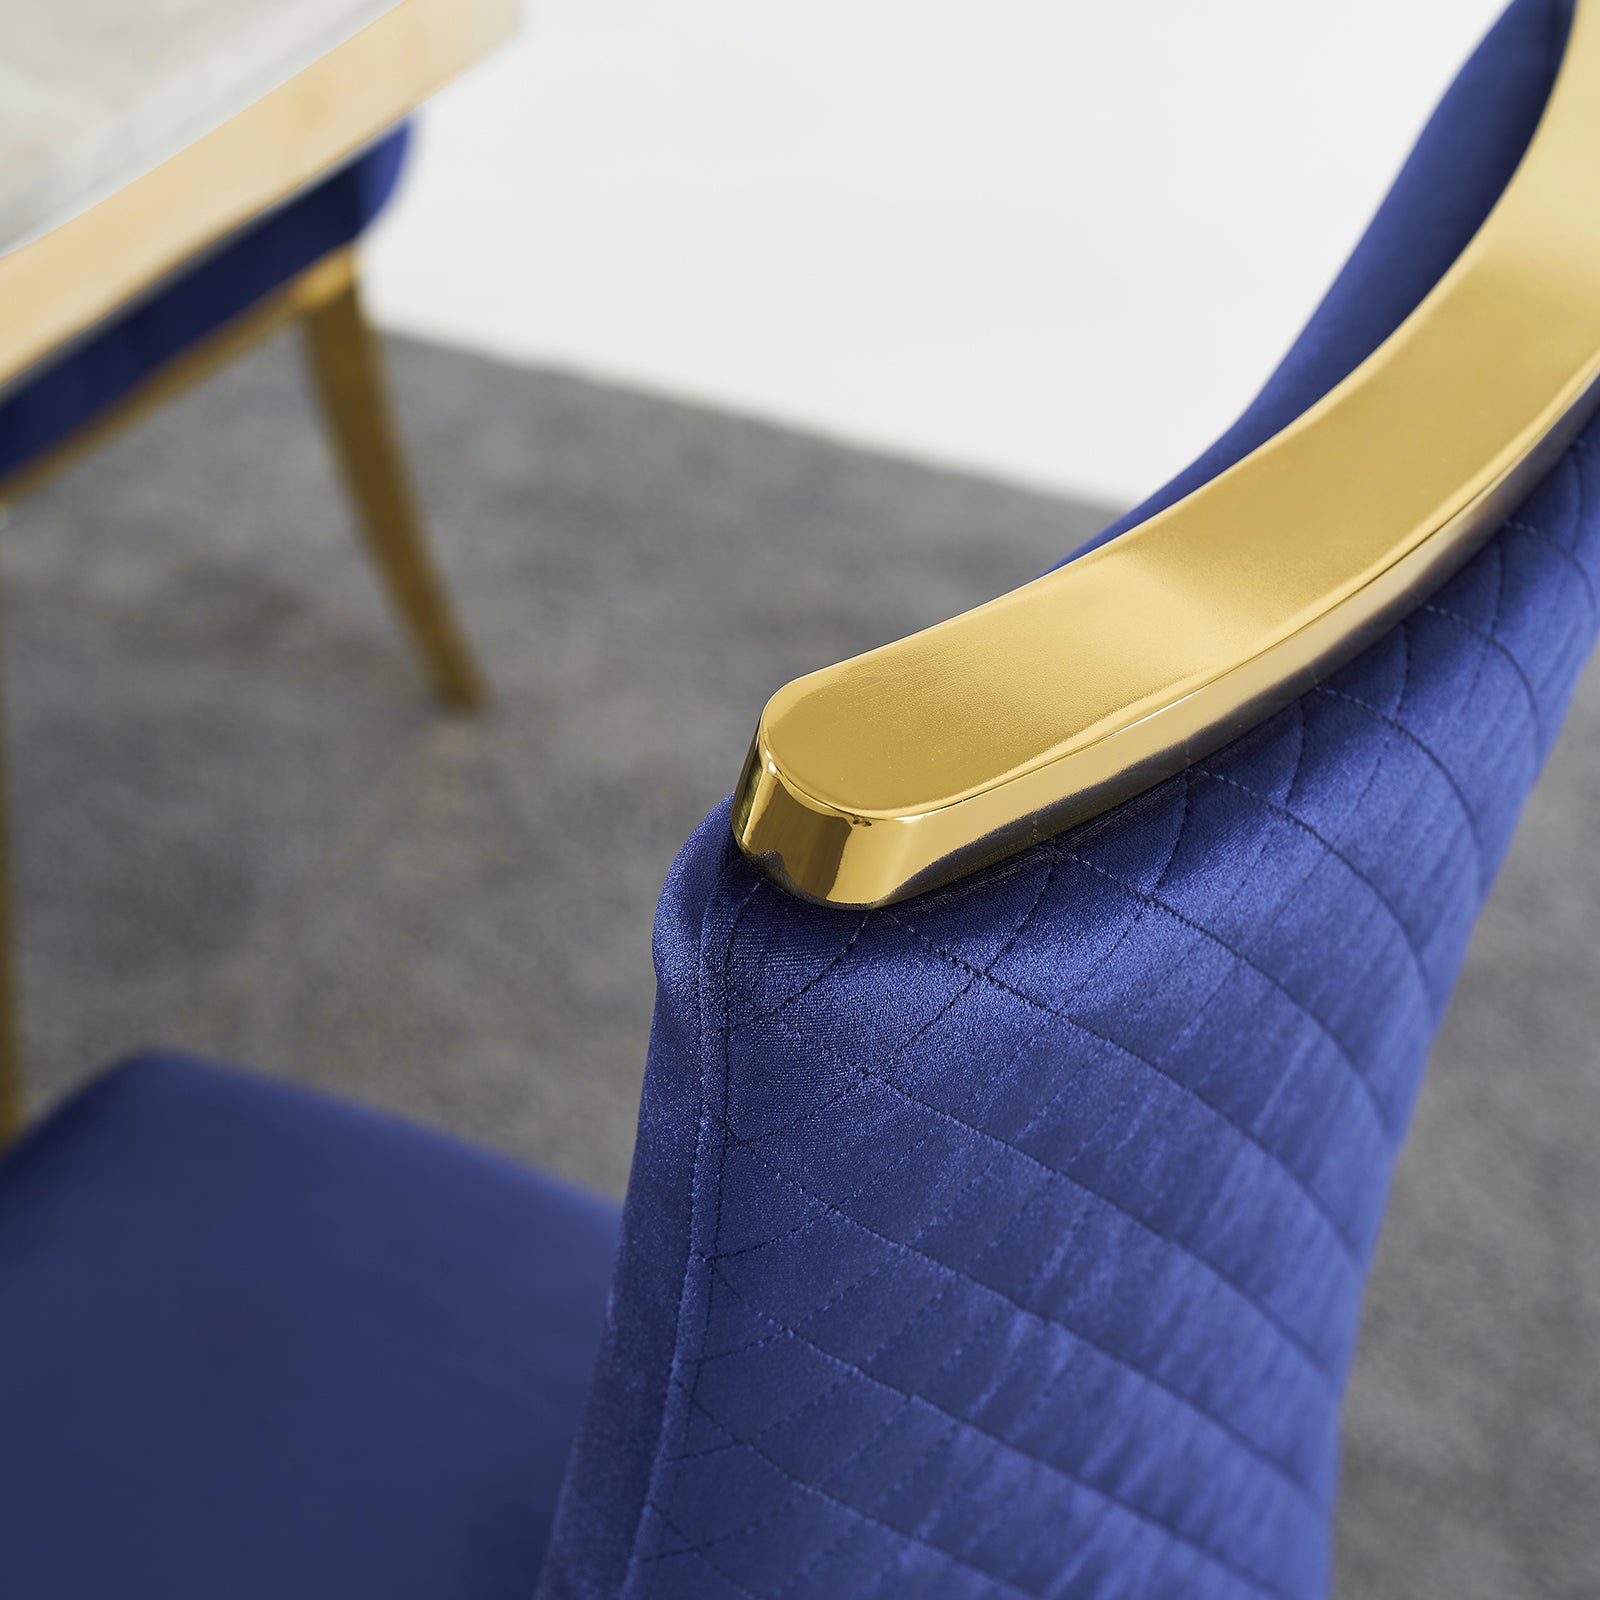 Blue Velvet Dining Chairs | Reticulate Texture Back| Gold Metal Legs | C139